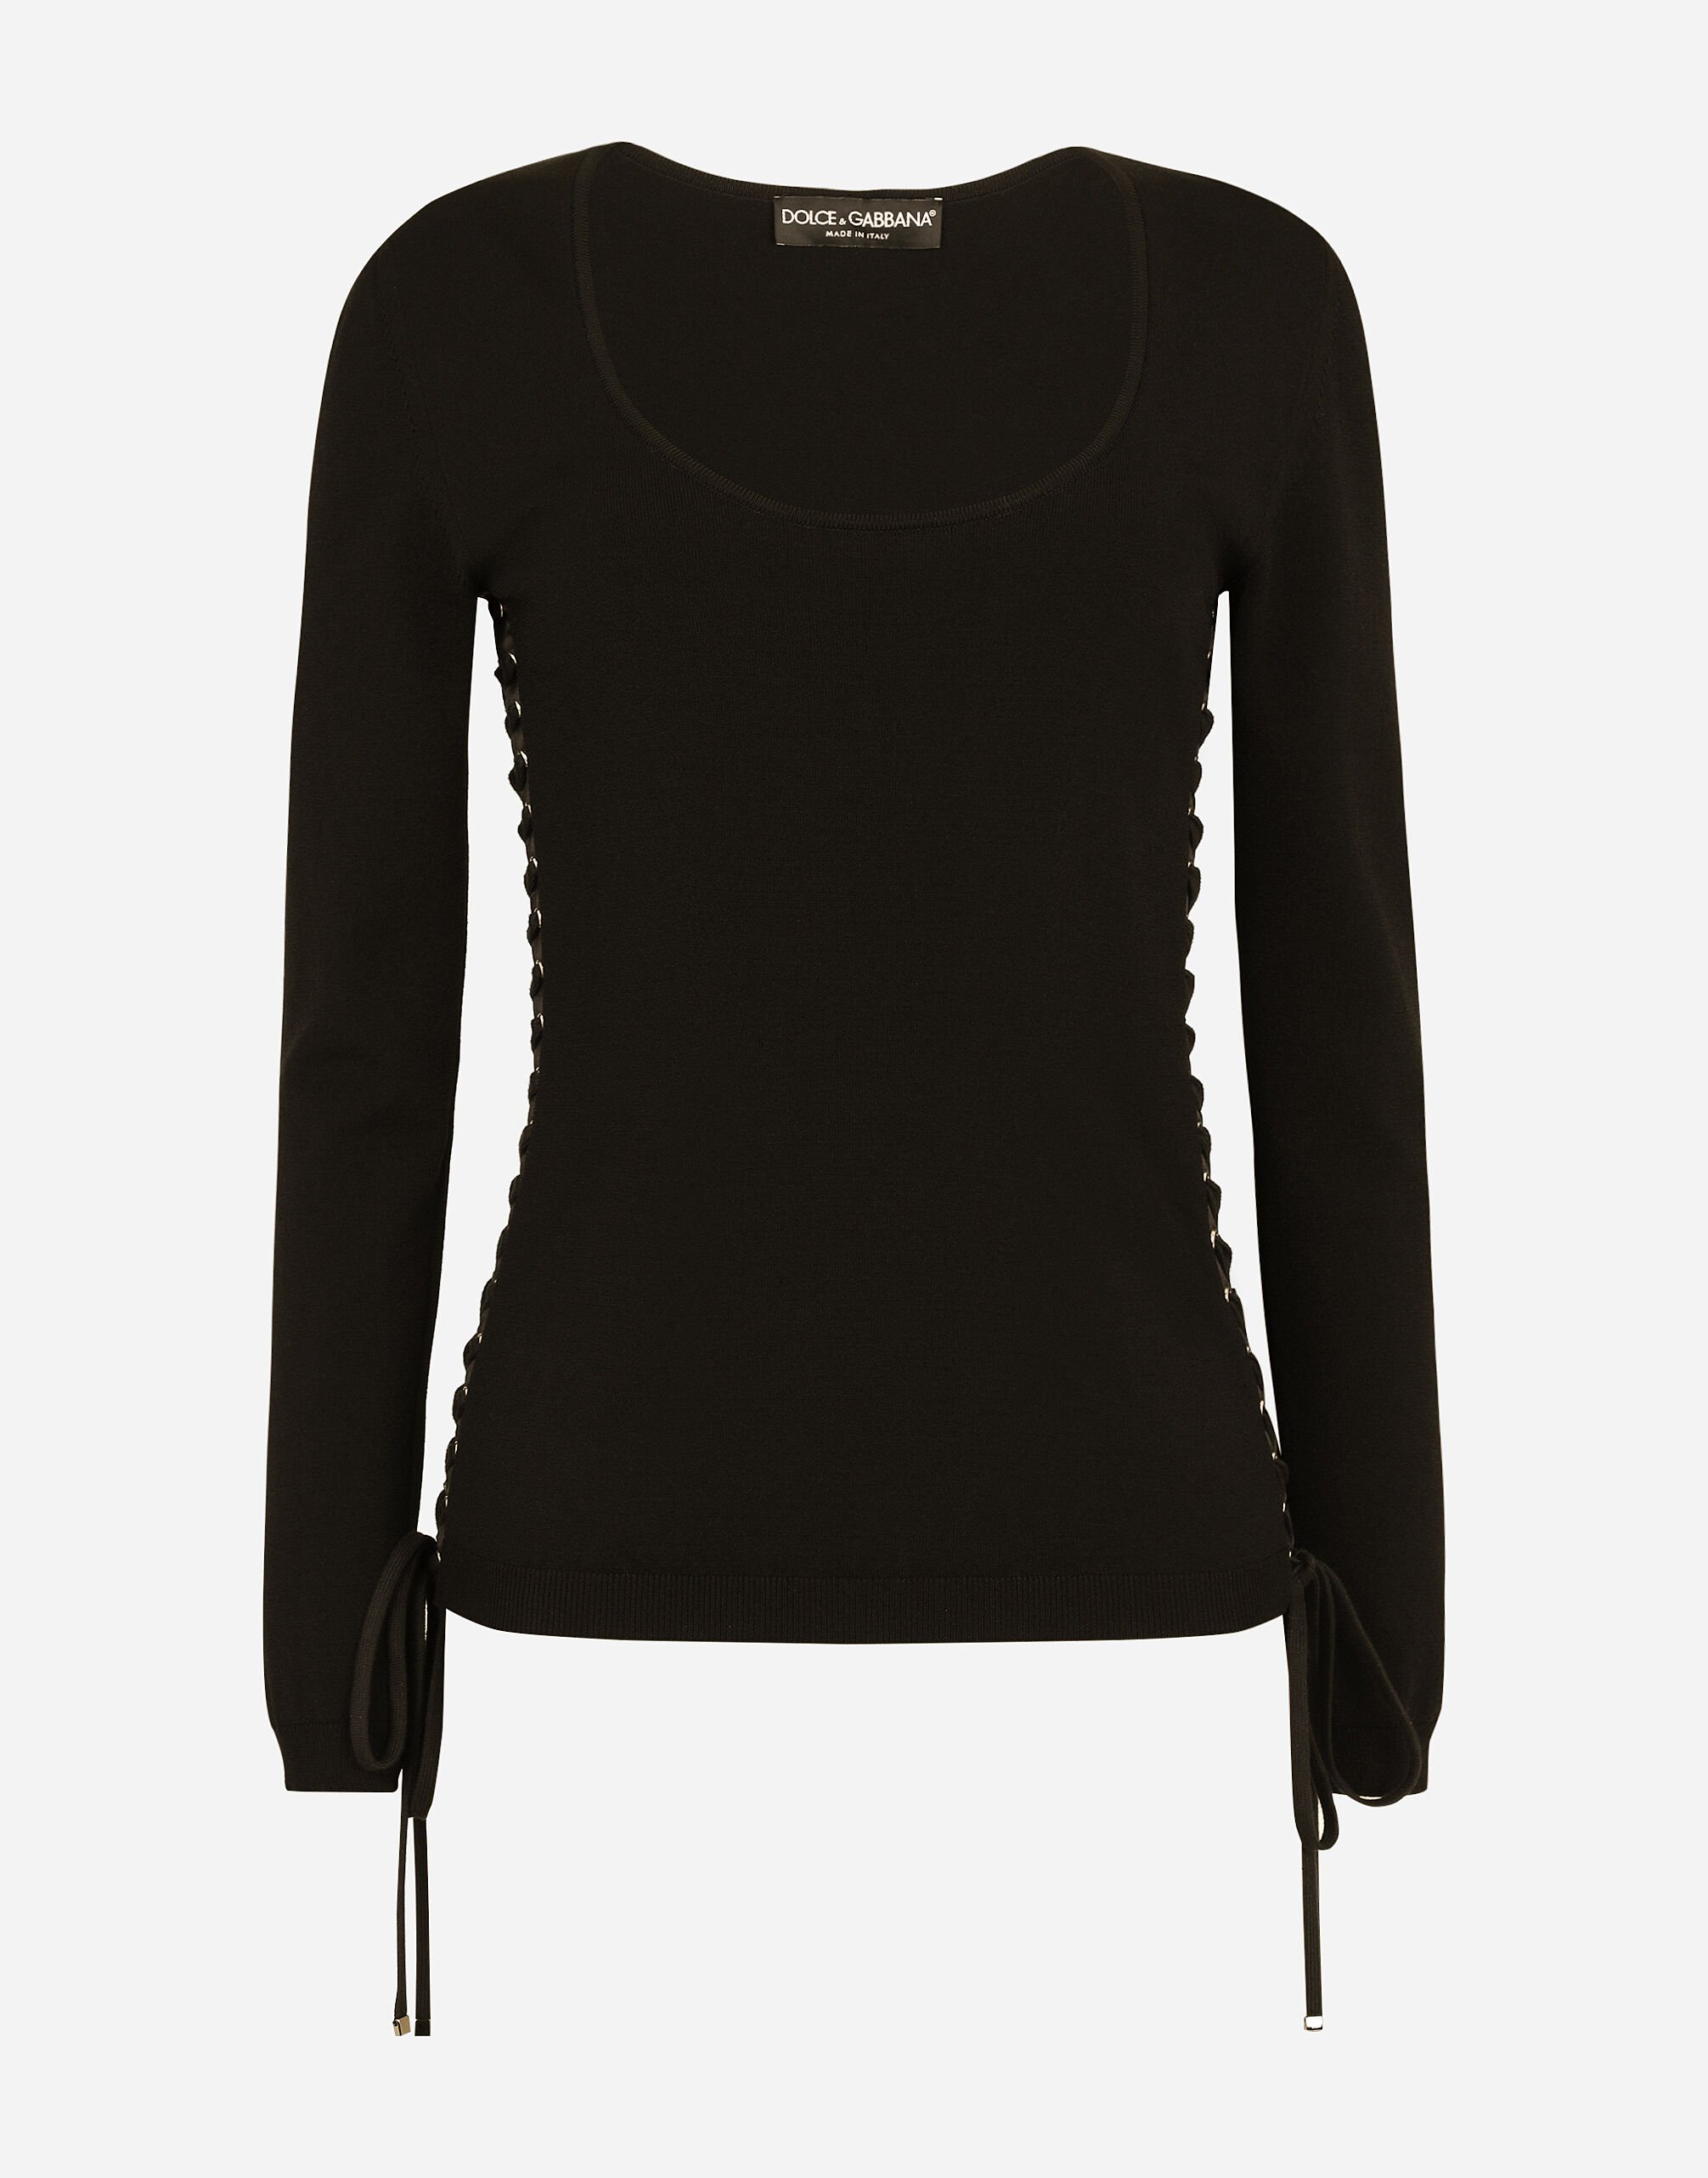 Dolce & Gabbana Viscose sweater with lacing and eyelets Black FXF72TJCMY0